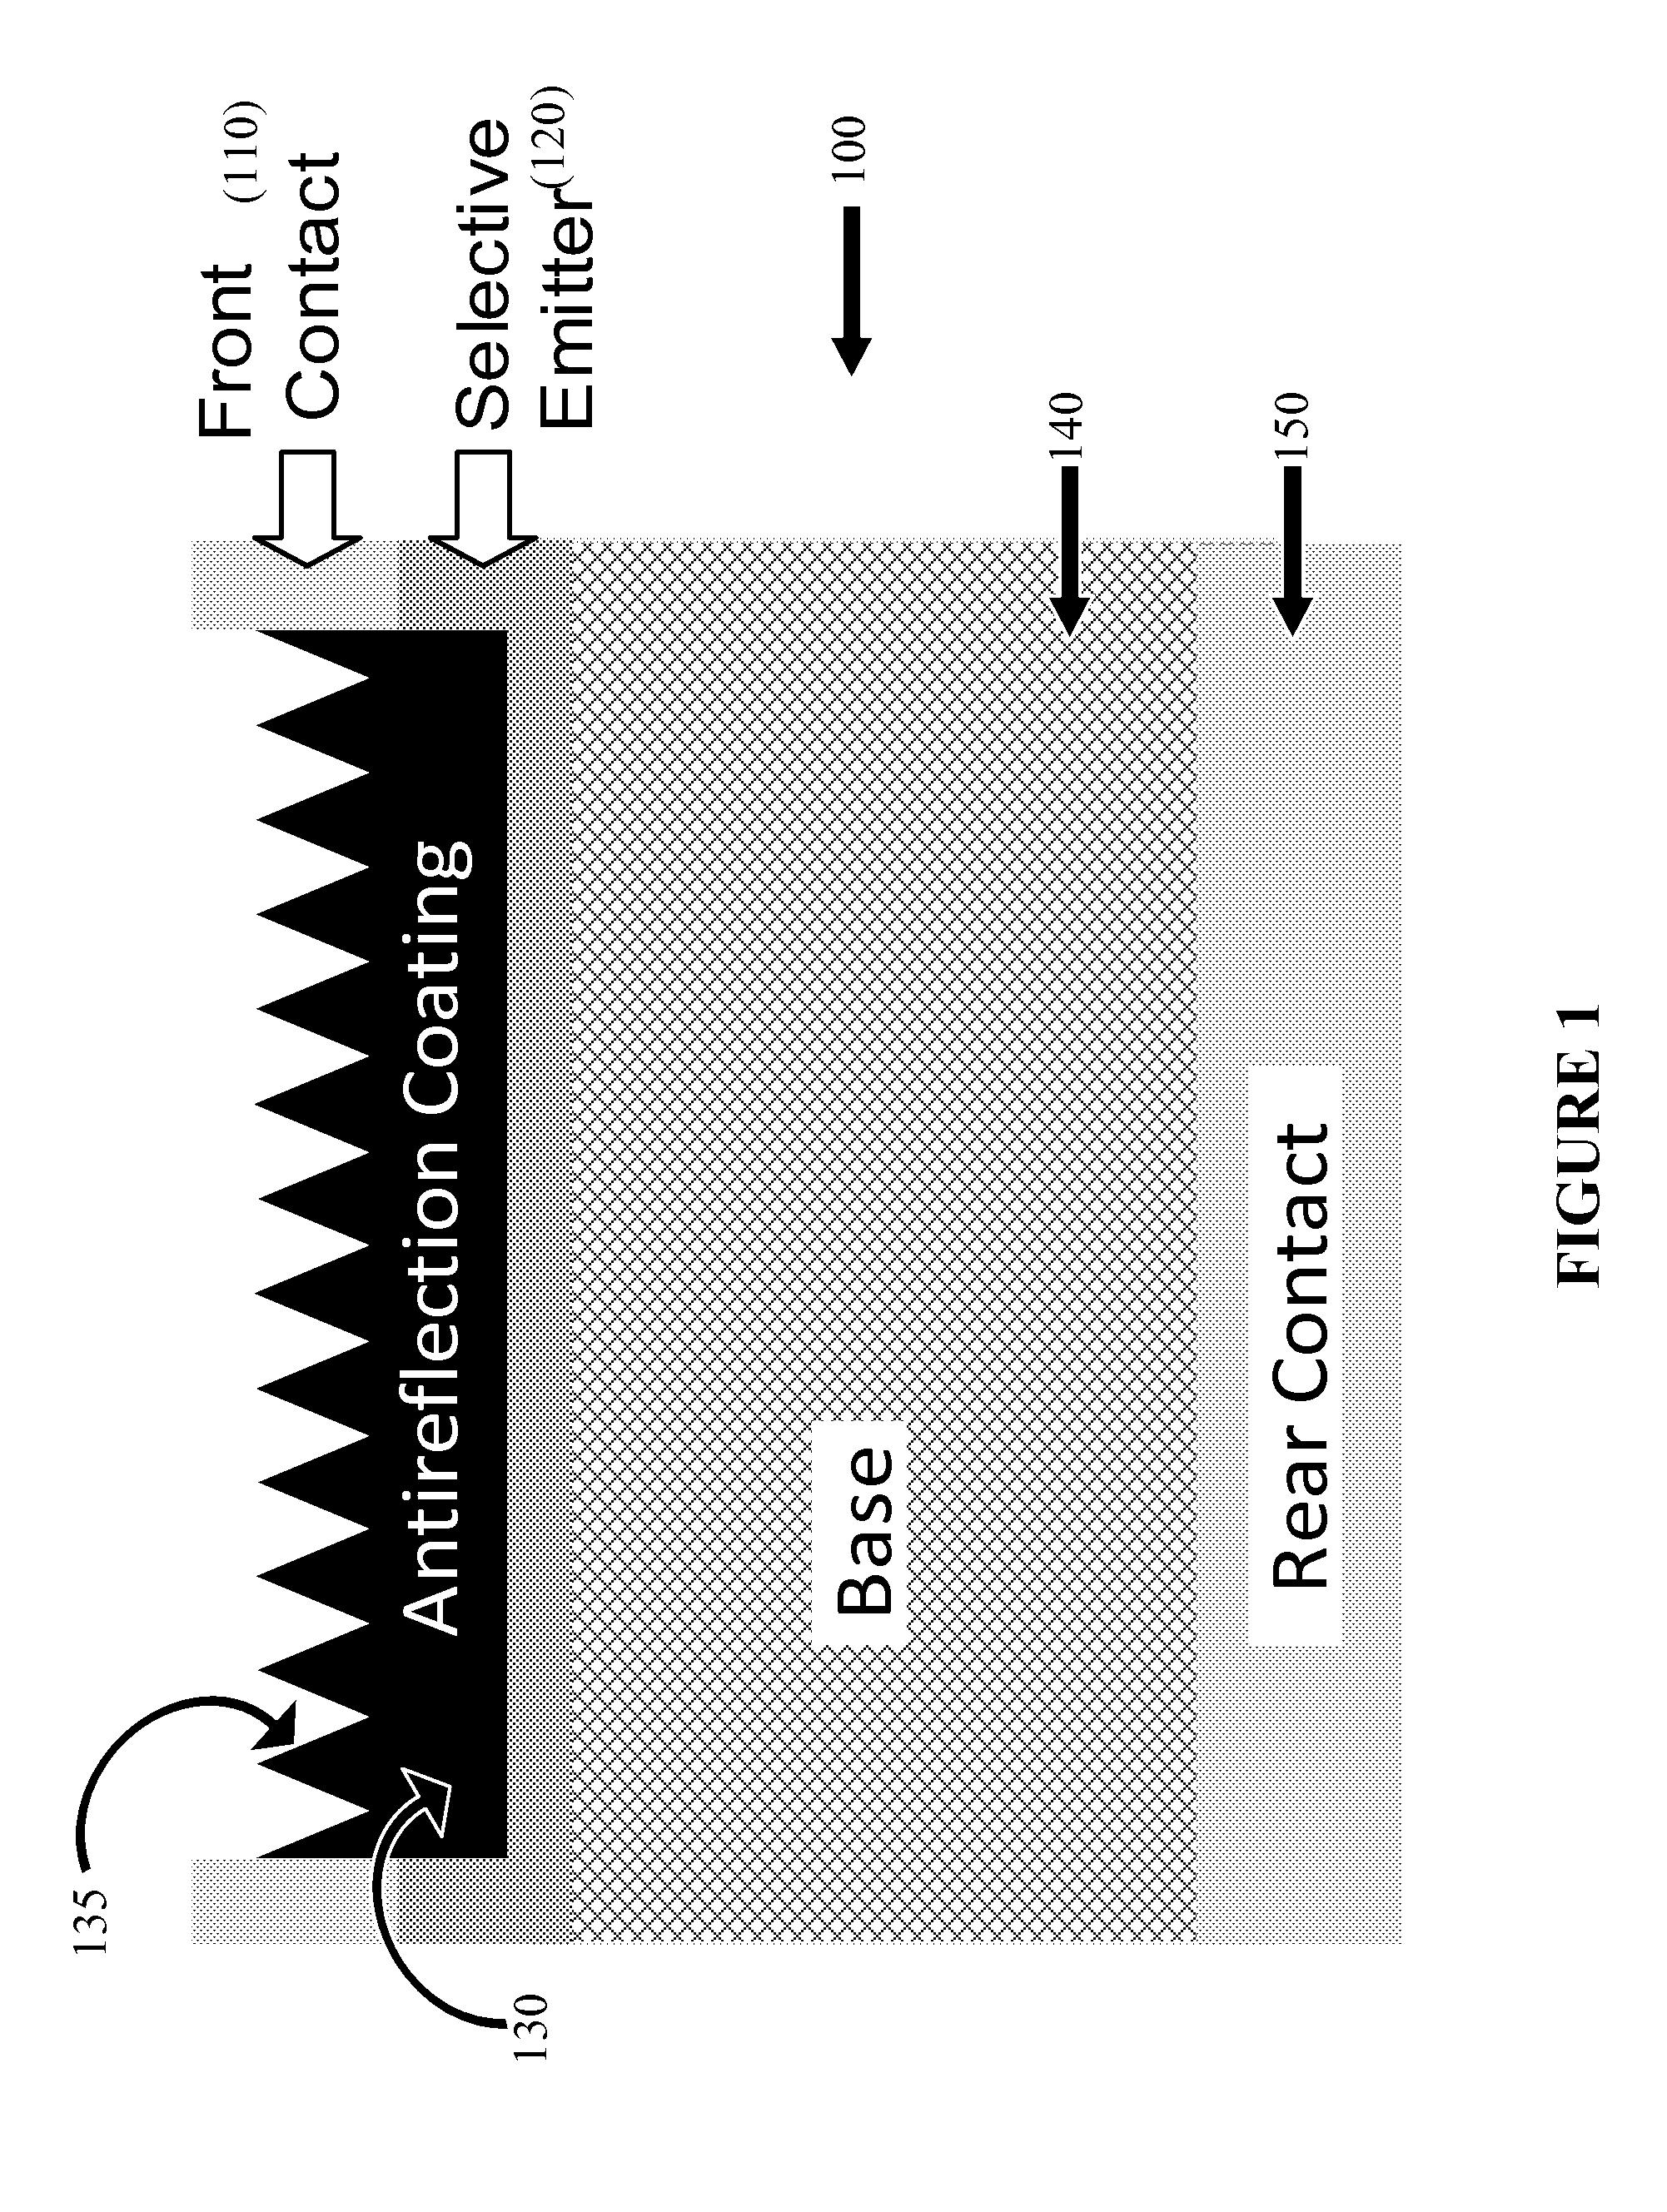 Methods, process and fabrication technology for high-efficiency low-cost crystalline silicon solar cells